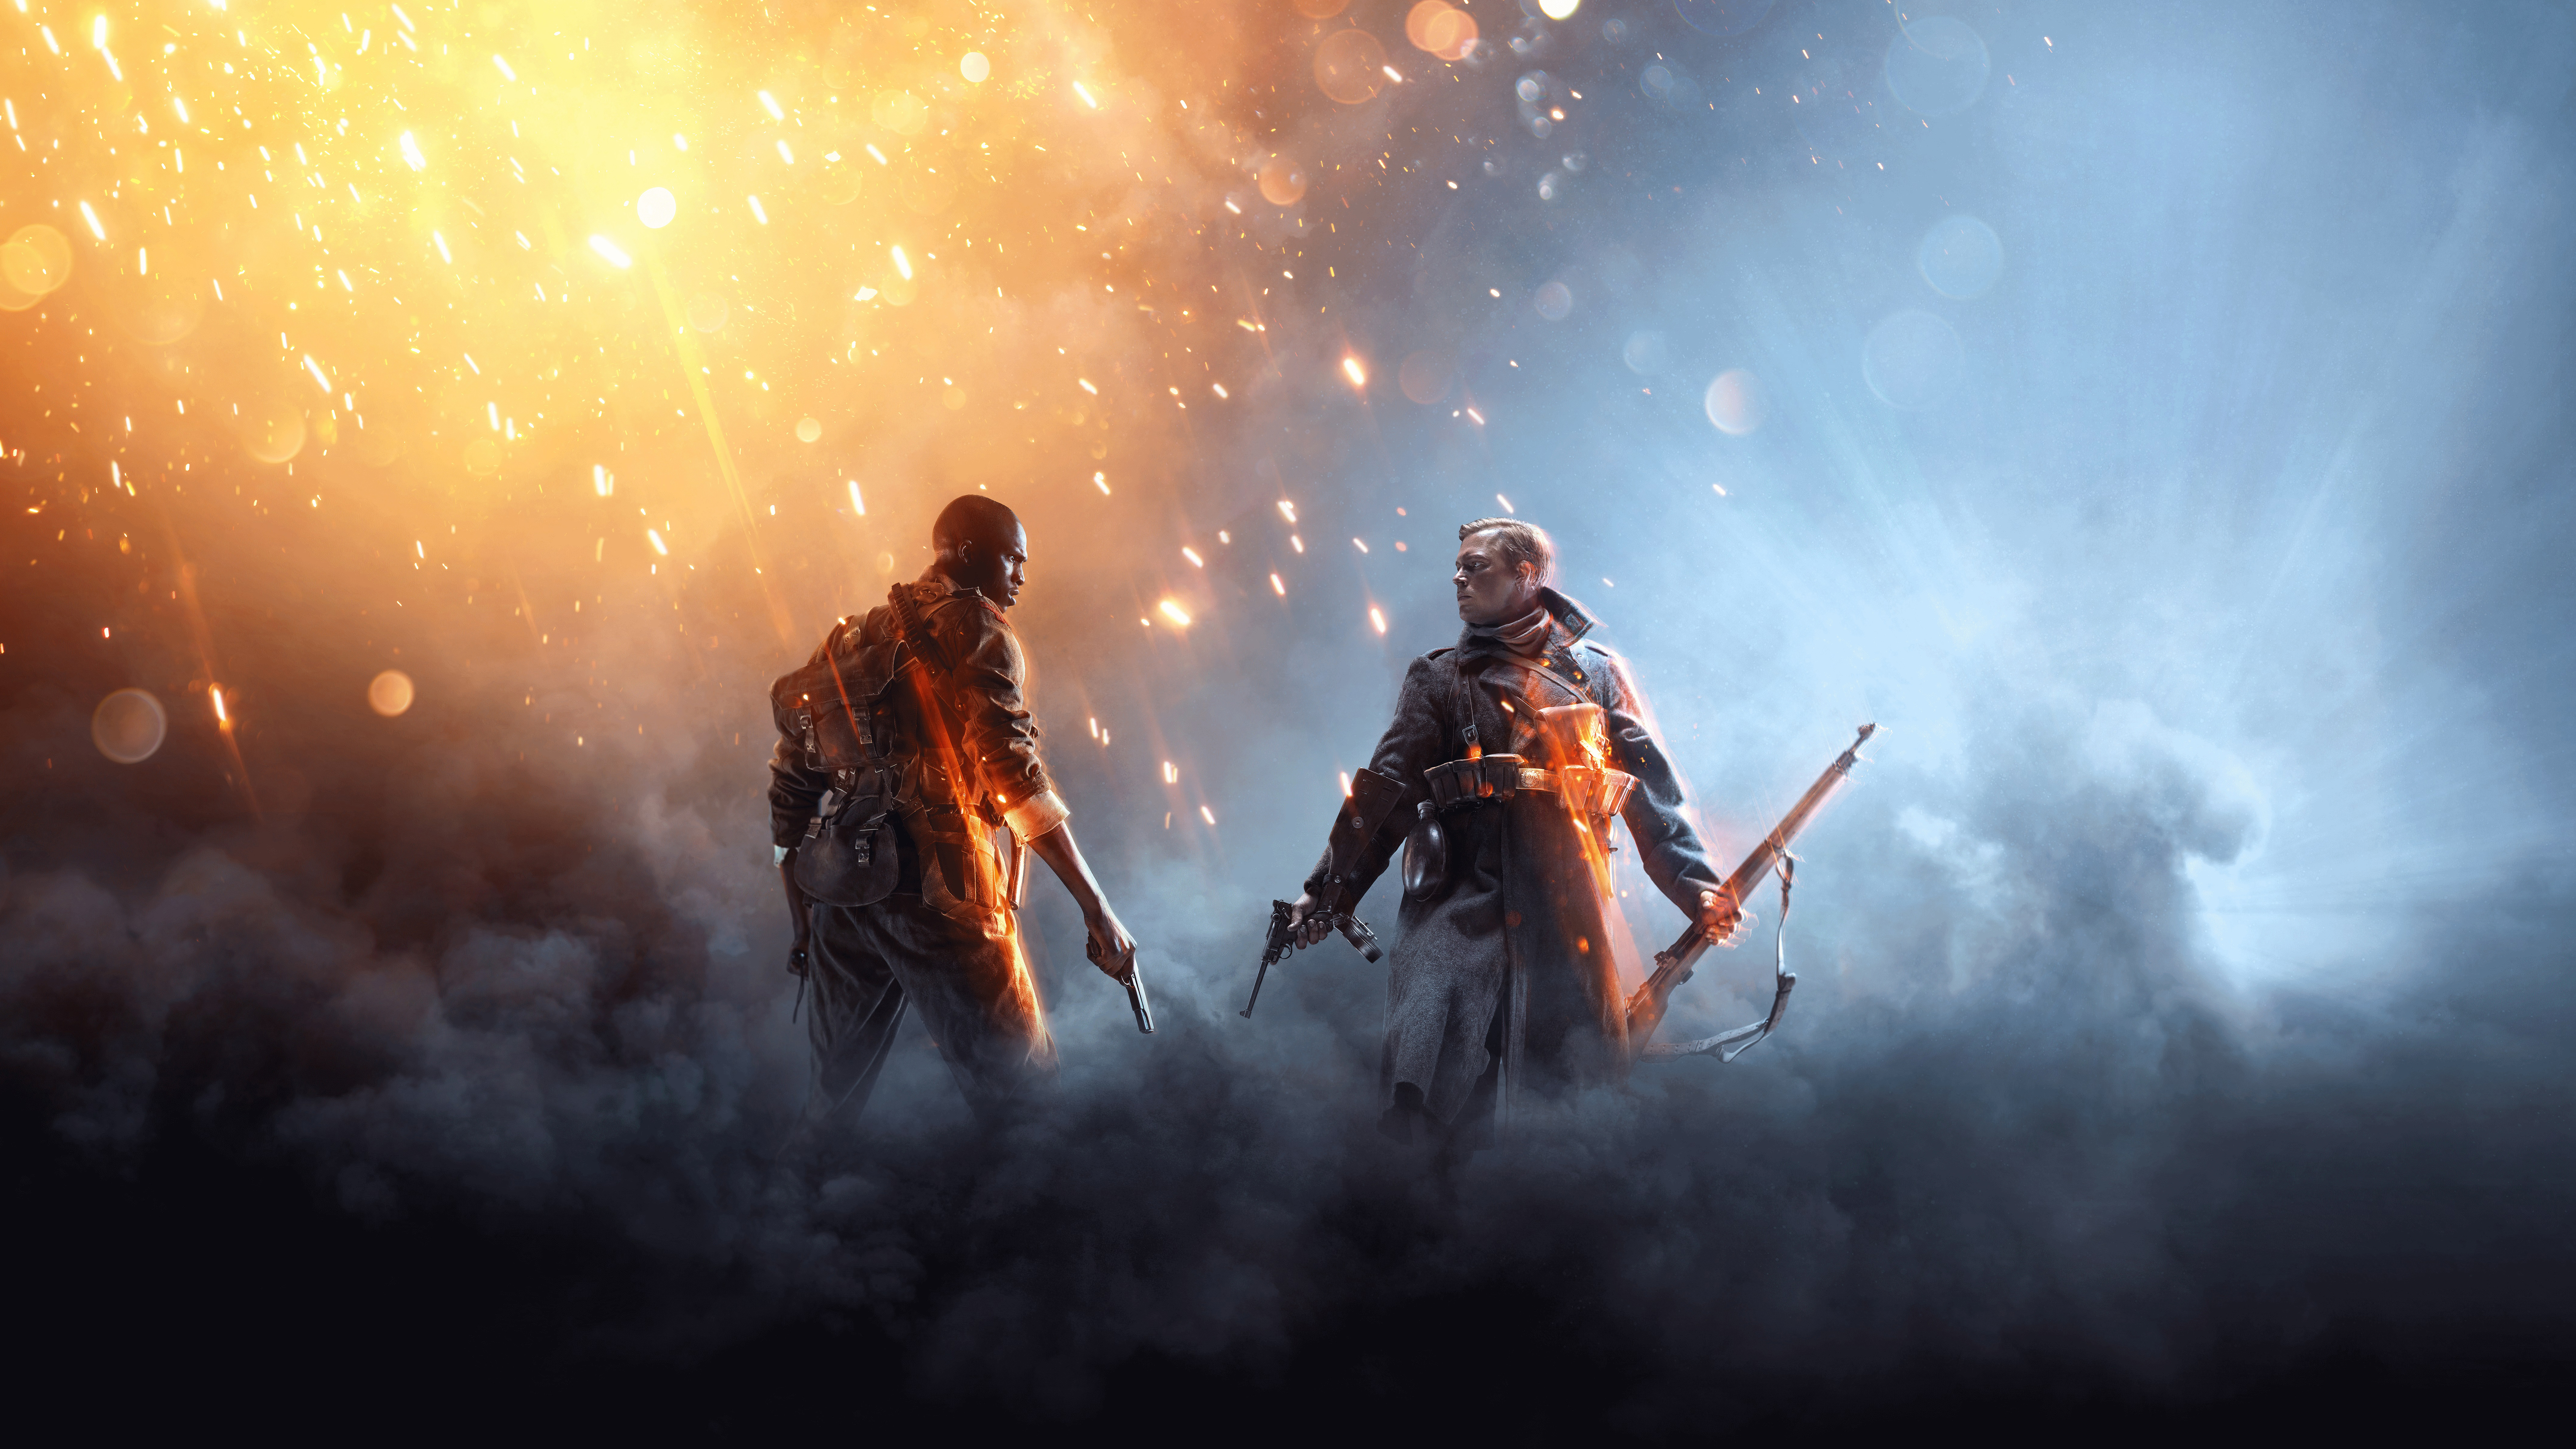 150+ Battlefield HD Wallpapers and Backgrounds